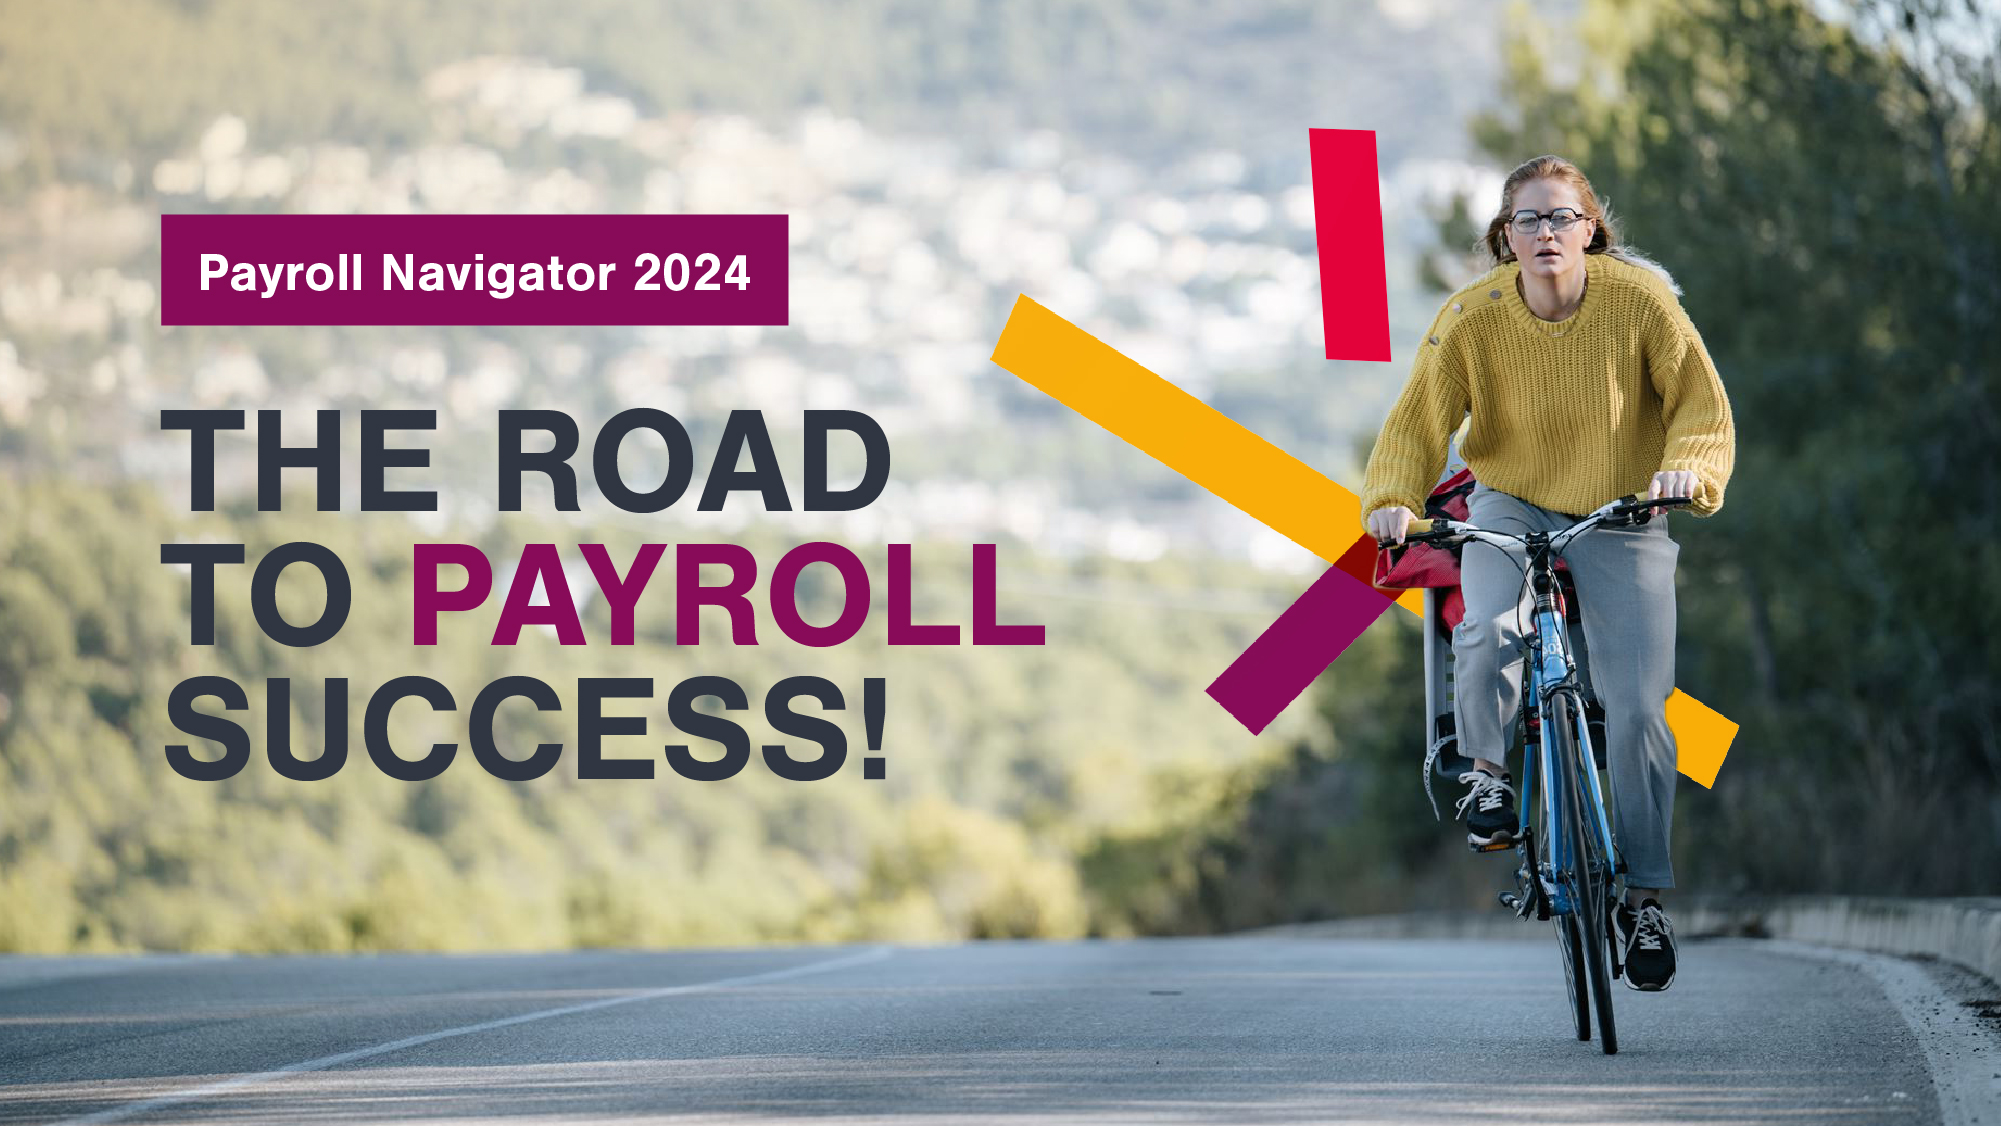 Looking for payroll success? We’ll show you the way